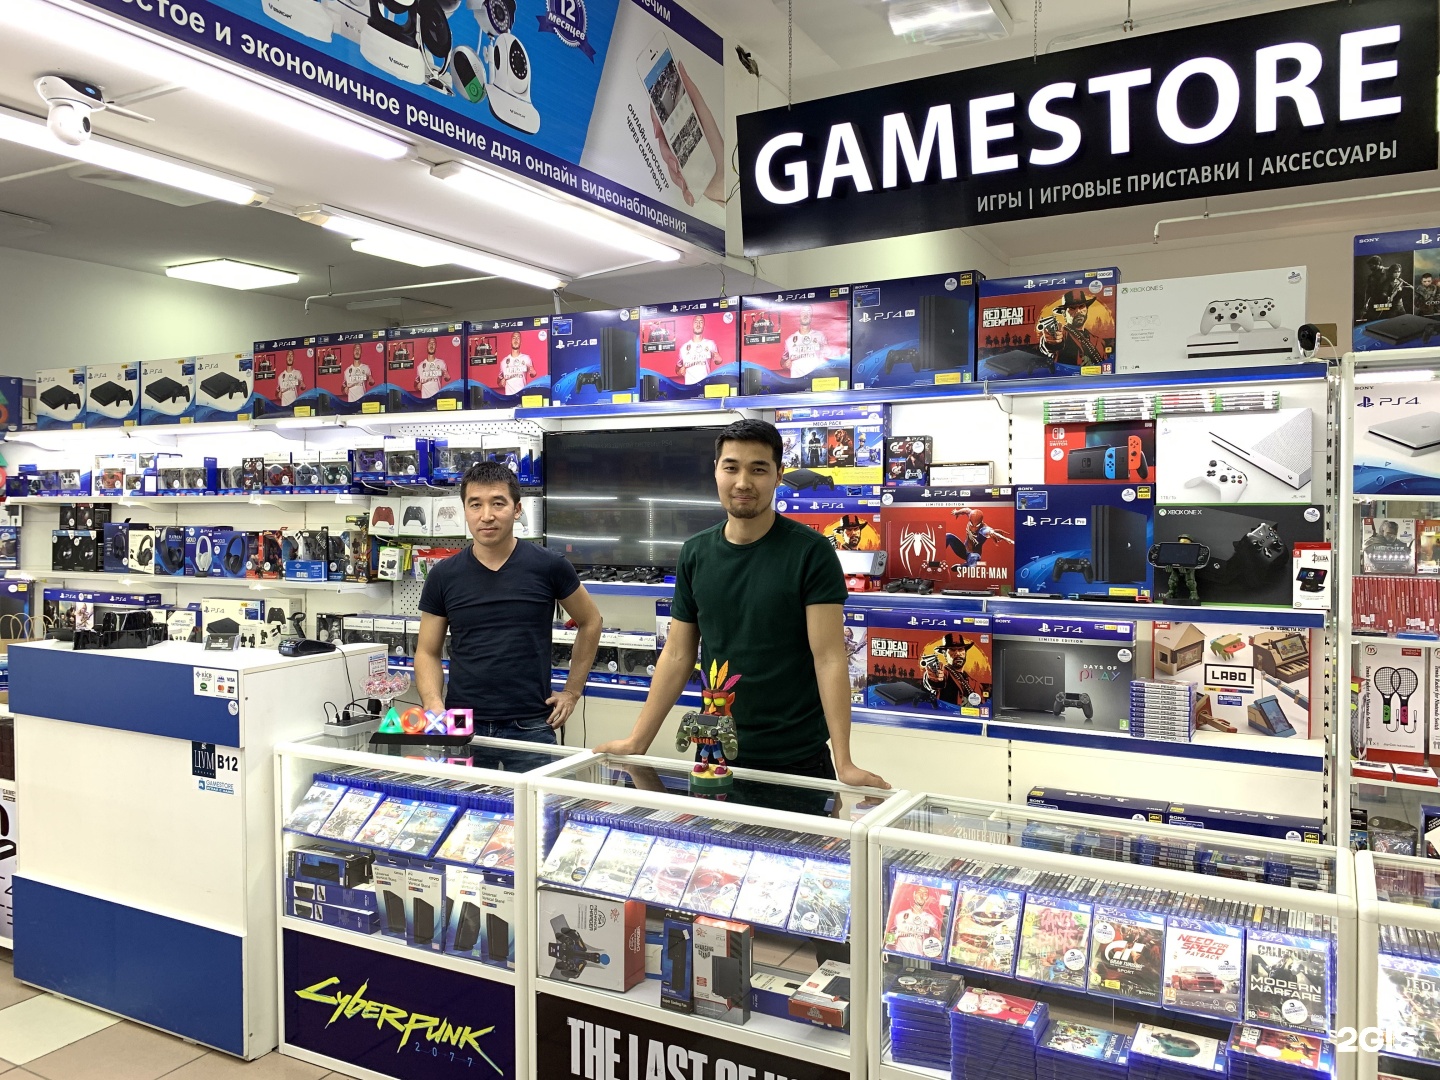 1 game store. Game Store. Гейм стор магазин. Gamestore магазин видеоигр. Магазин gamestore в Екатеринбурге.